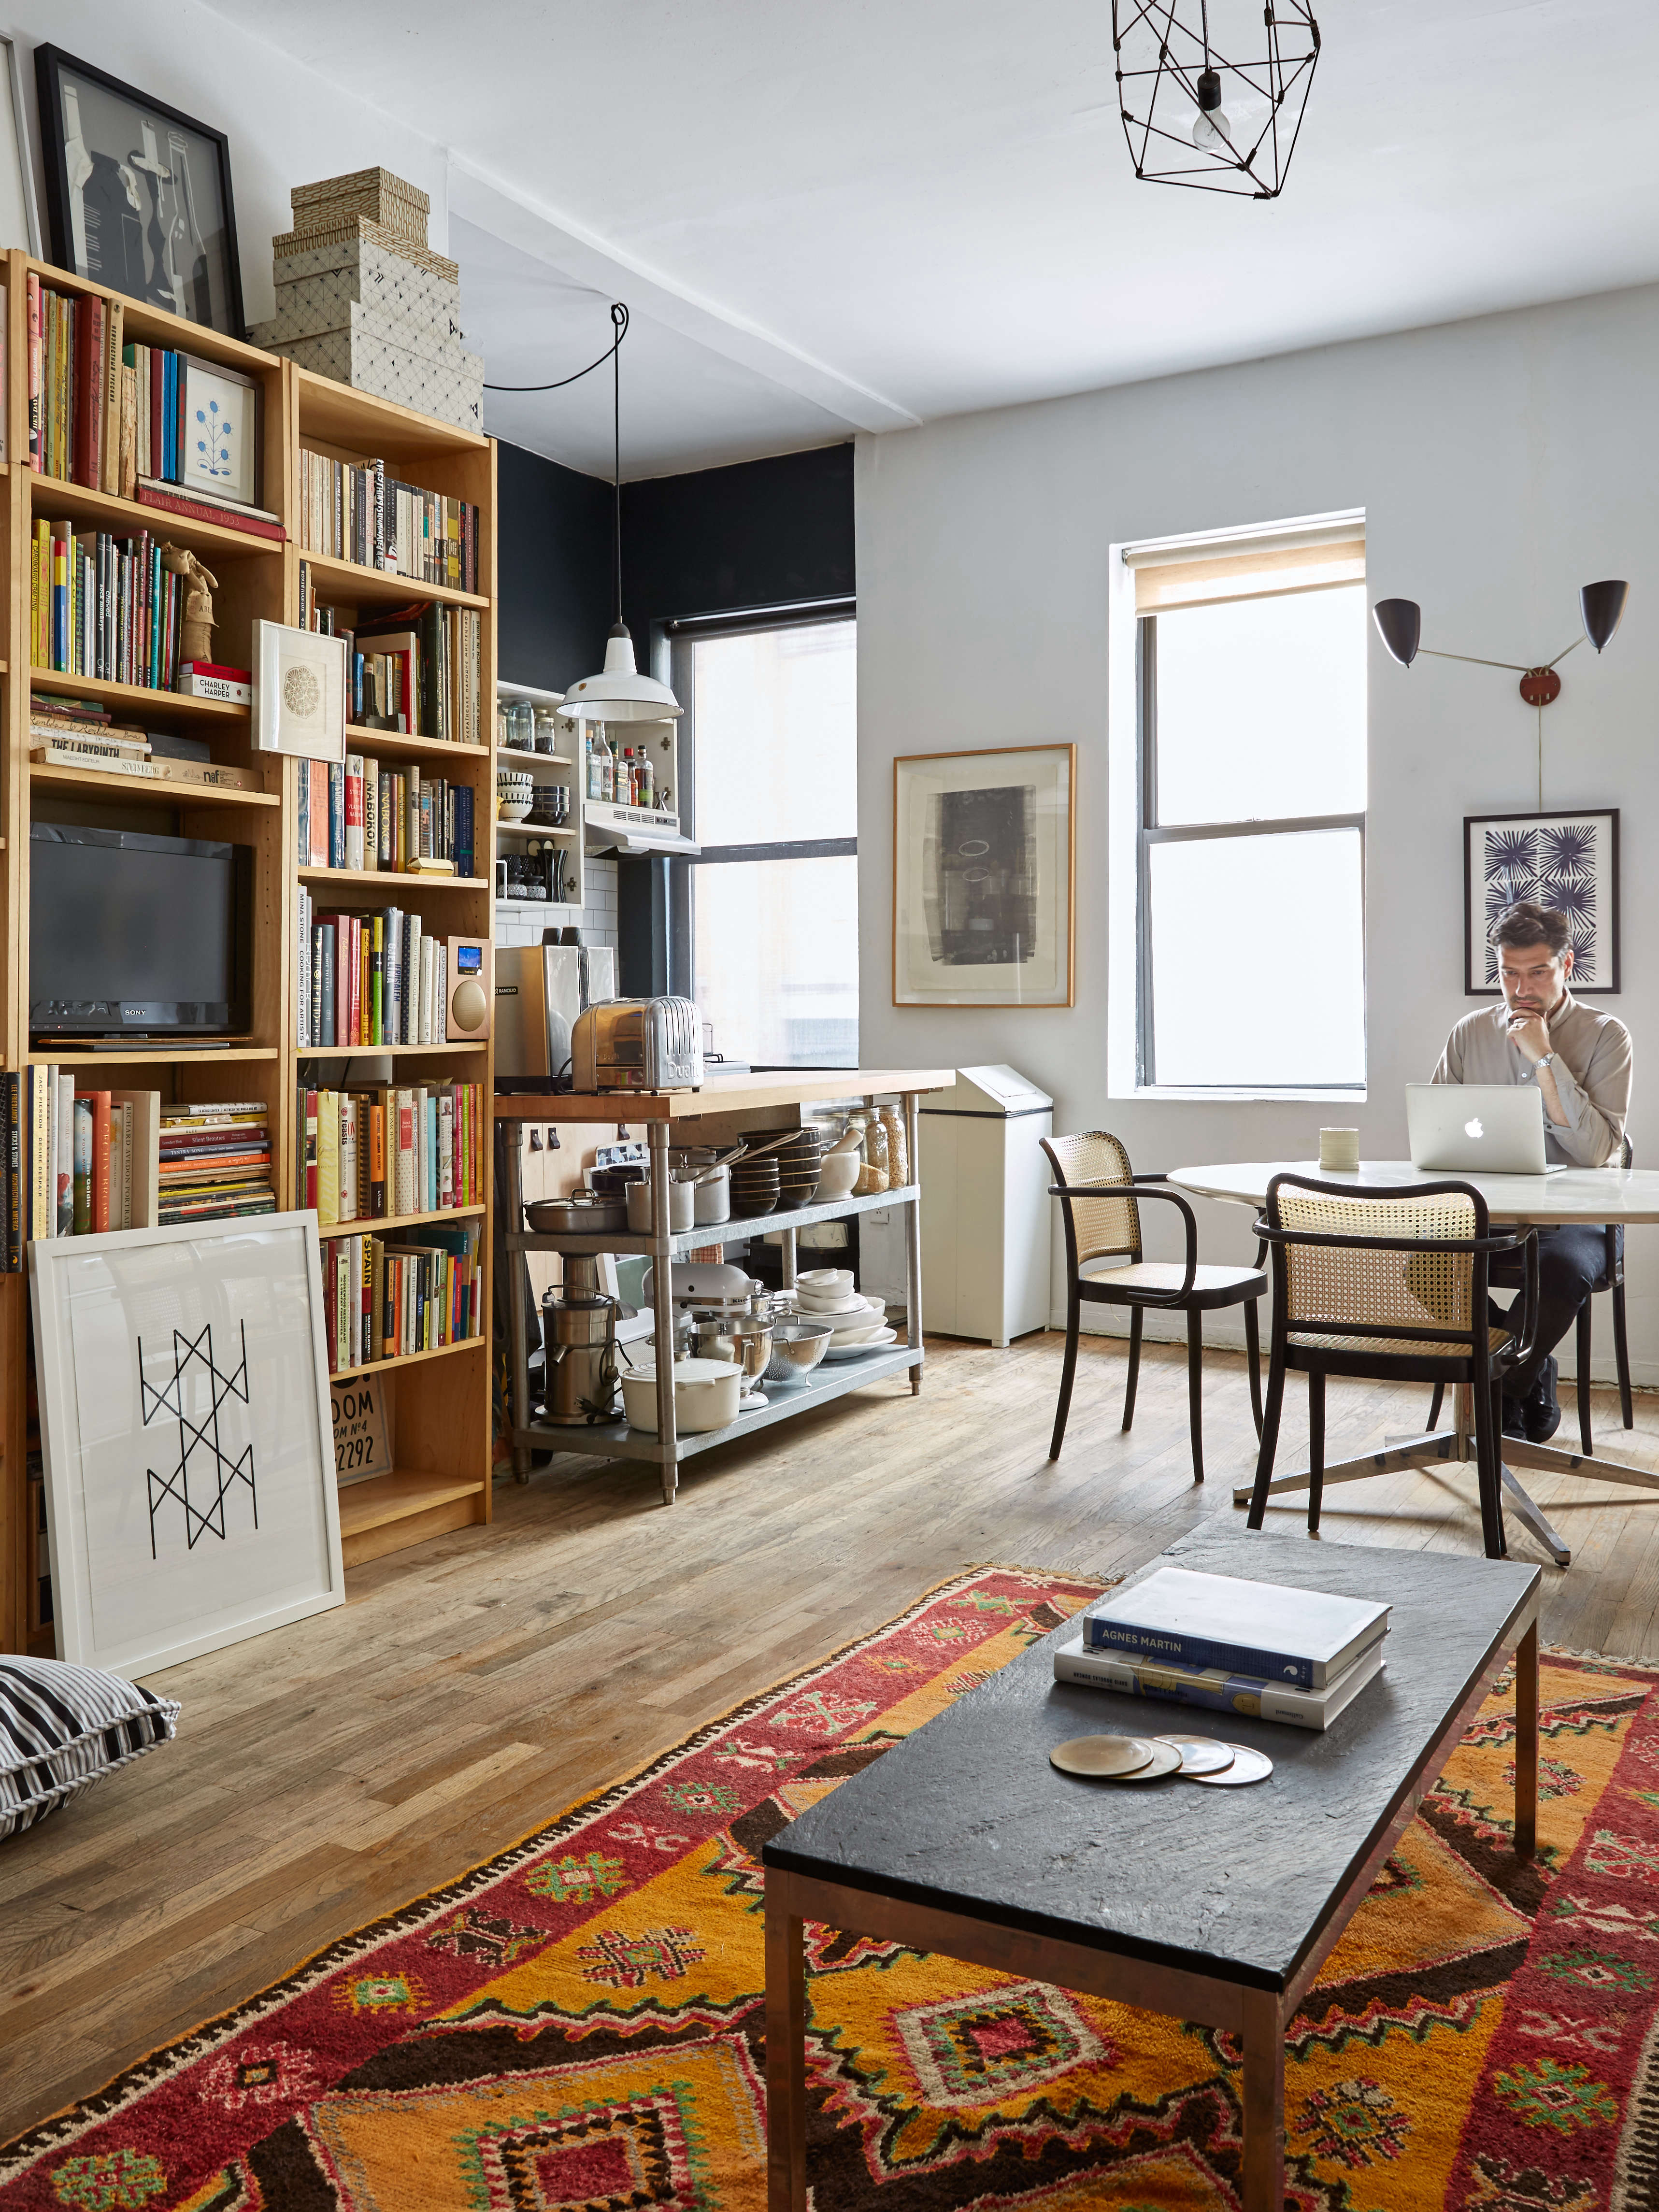 Roman Luba at home in his DIY remodeled NYC apartment | Kate Sears photo